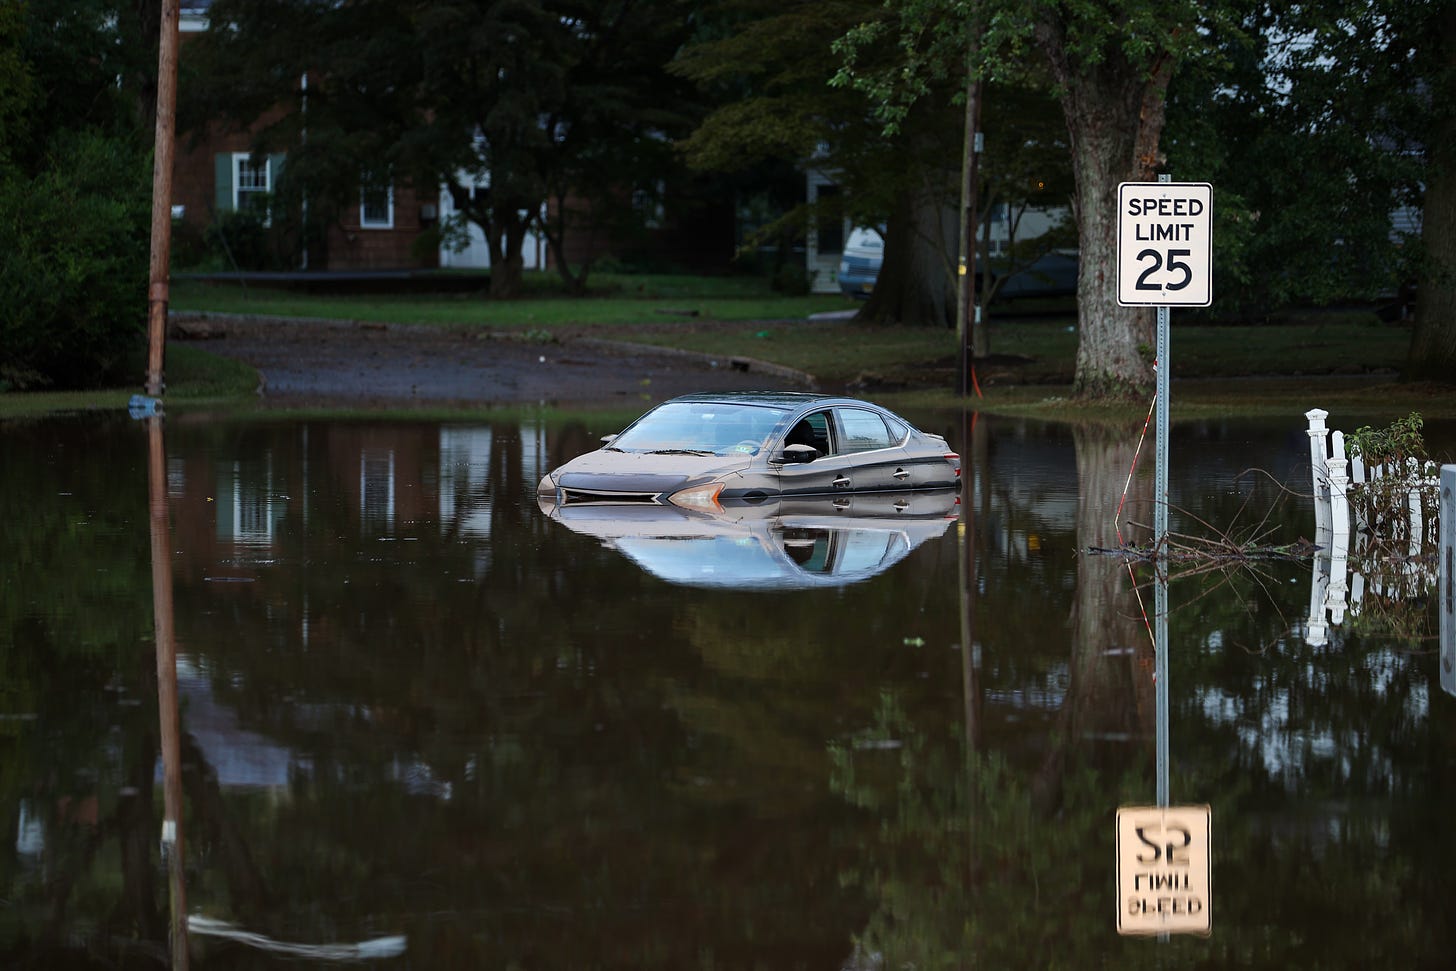 Going well under the speed limit in Bound Brook, NJ, on Sep. 2, 2021. (Photo: Getty Images)